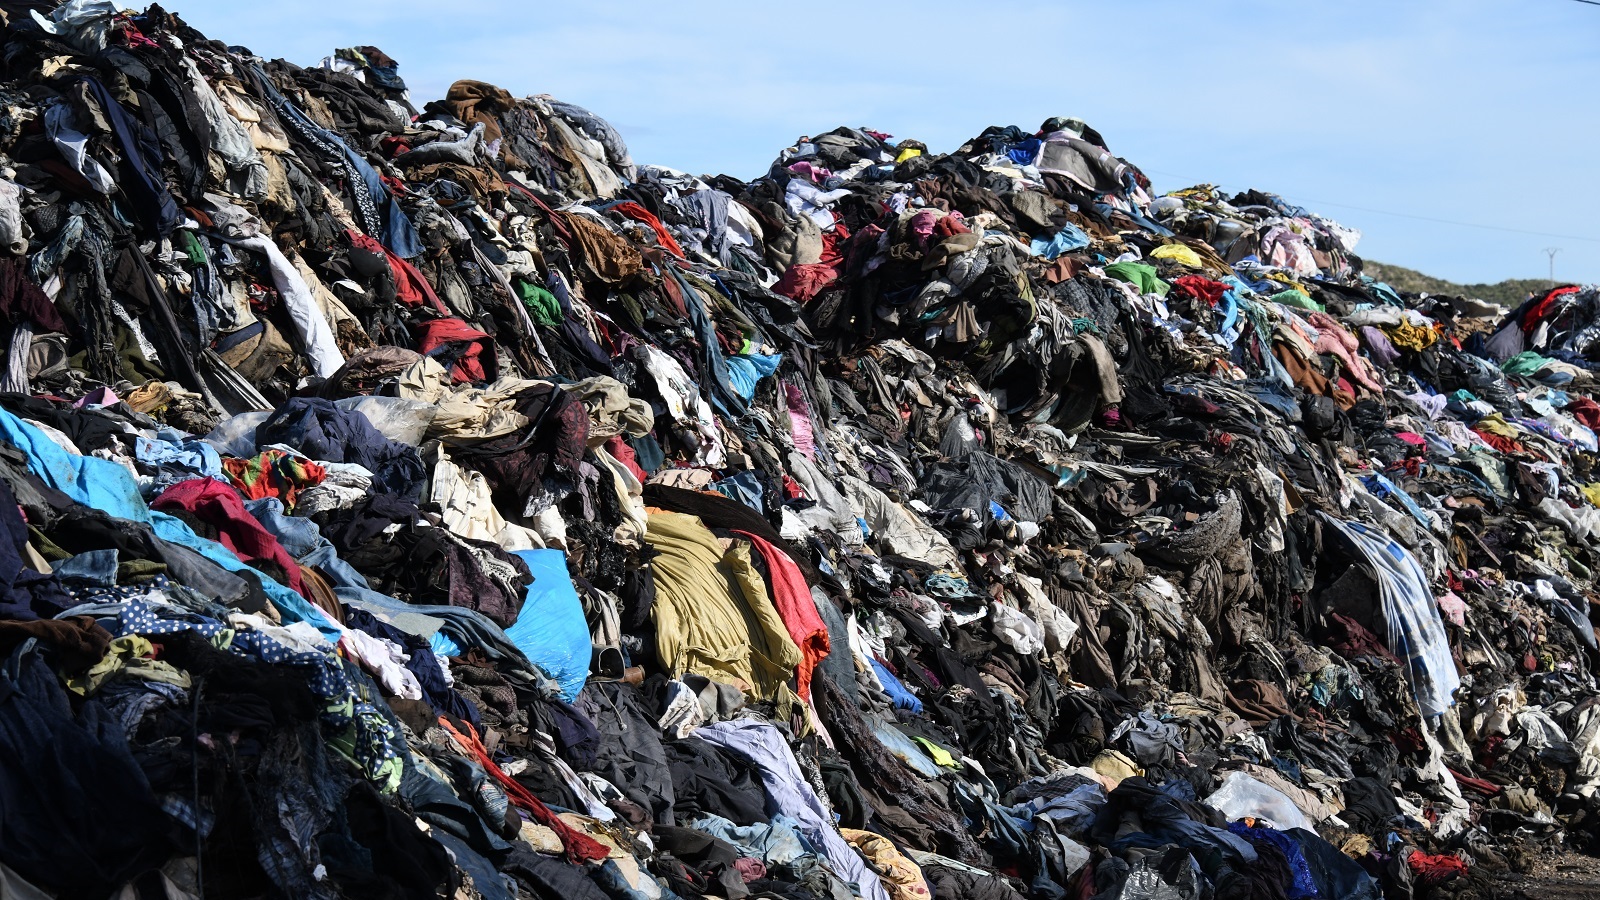 A large pile of clothes